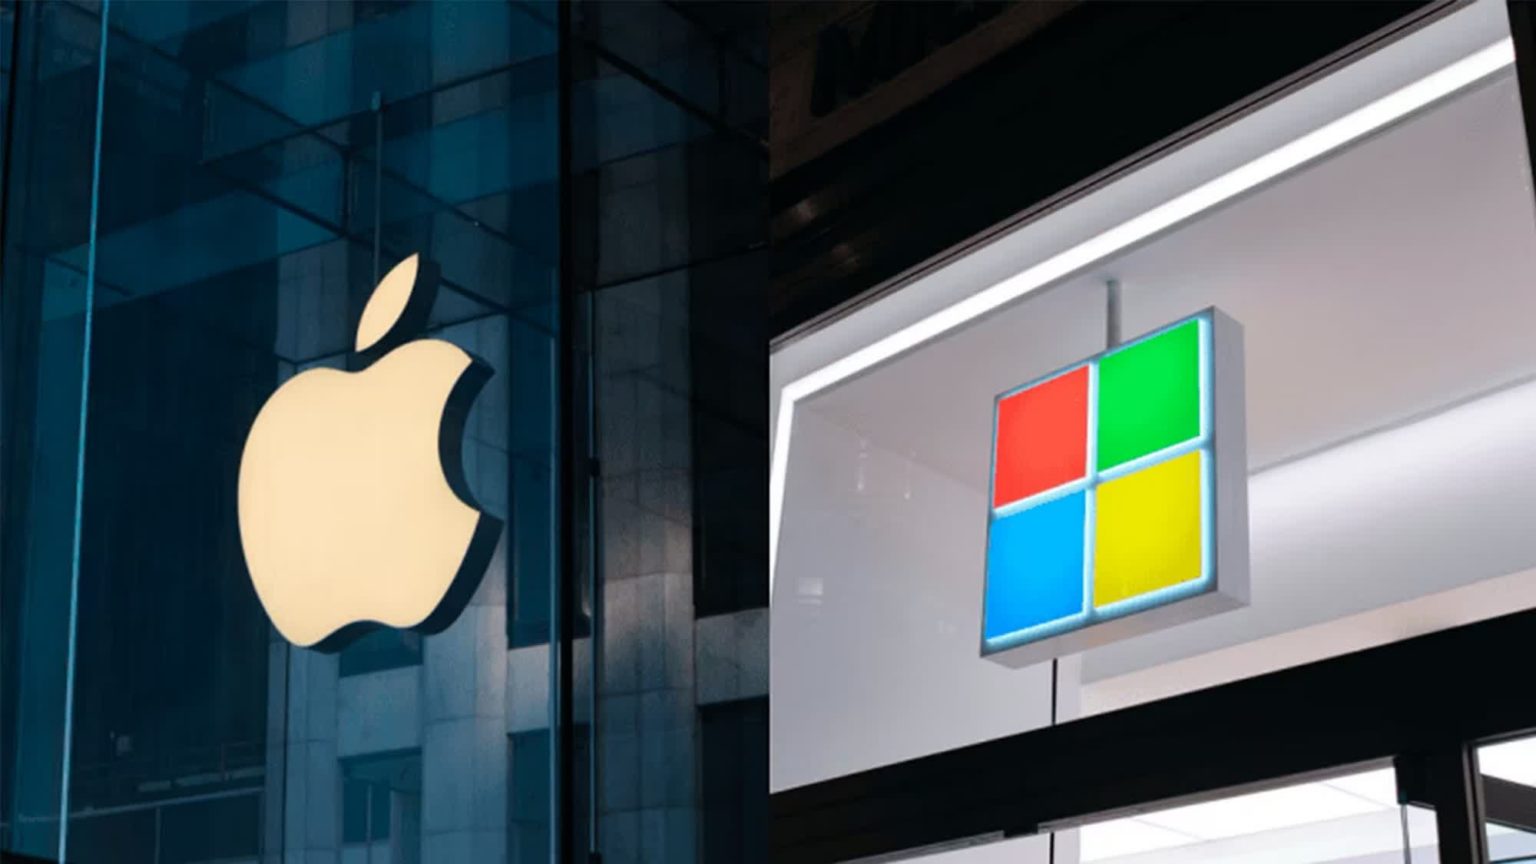 Microsoft briefly dethroned Apple as the world